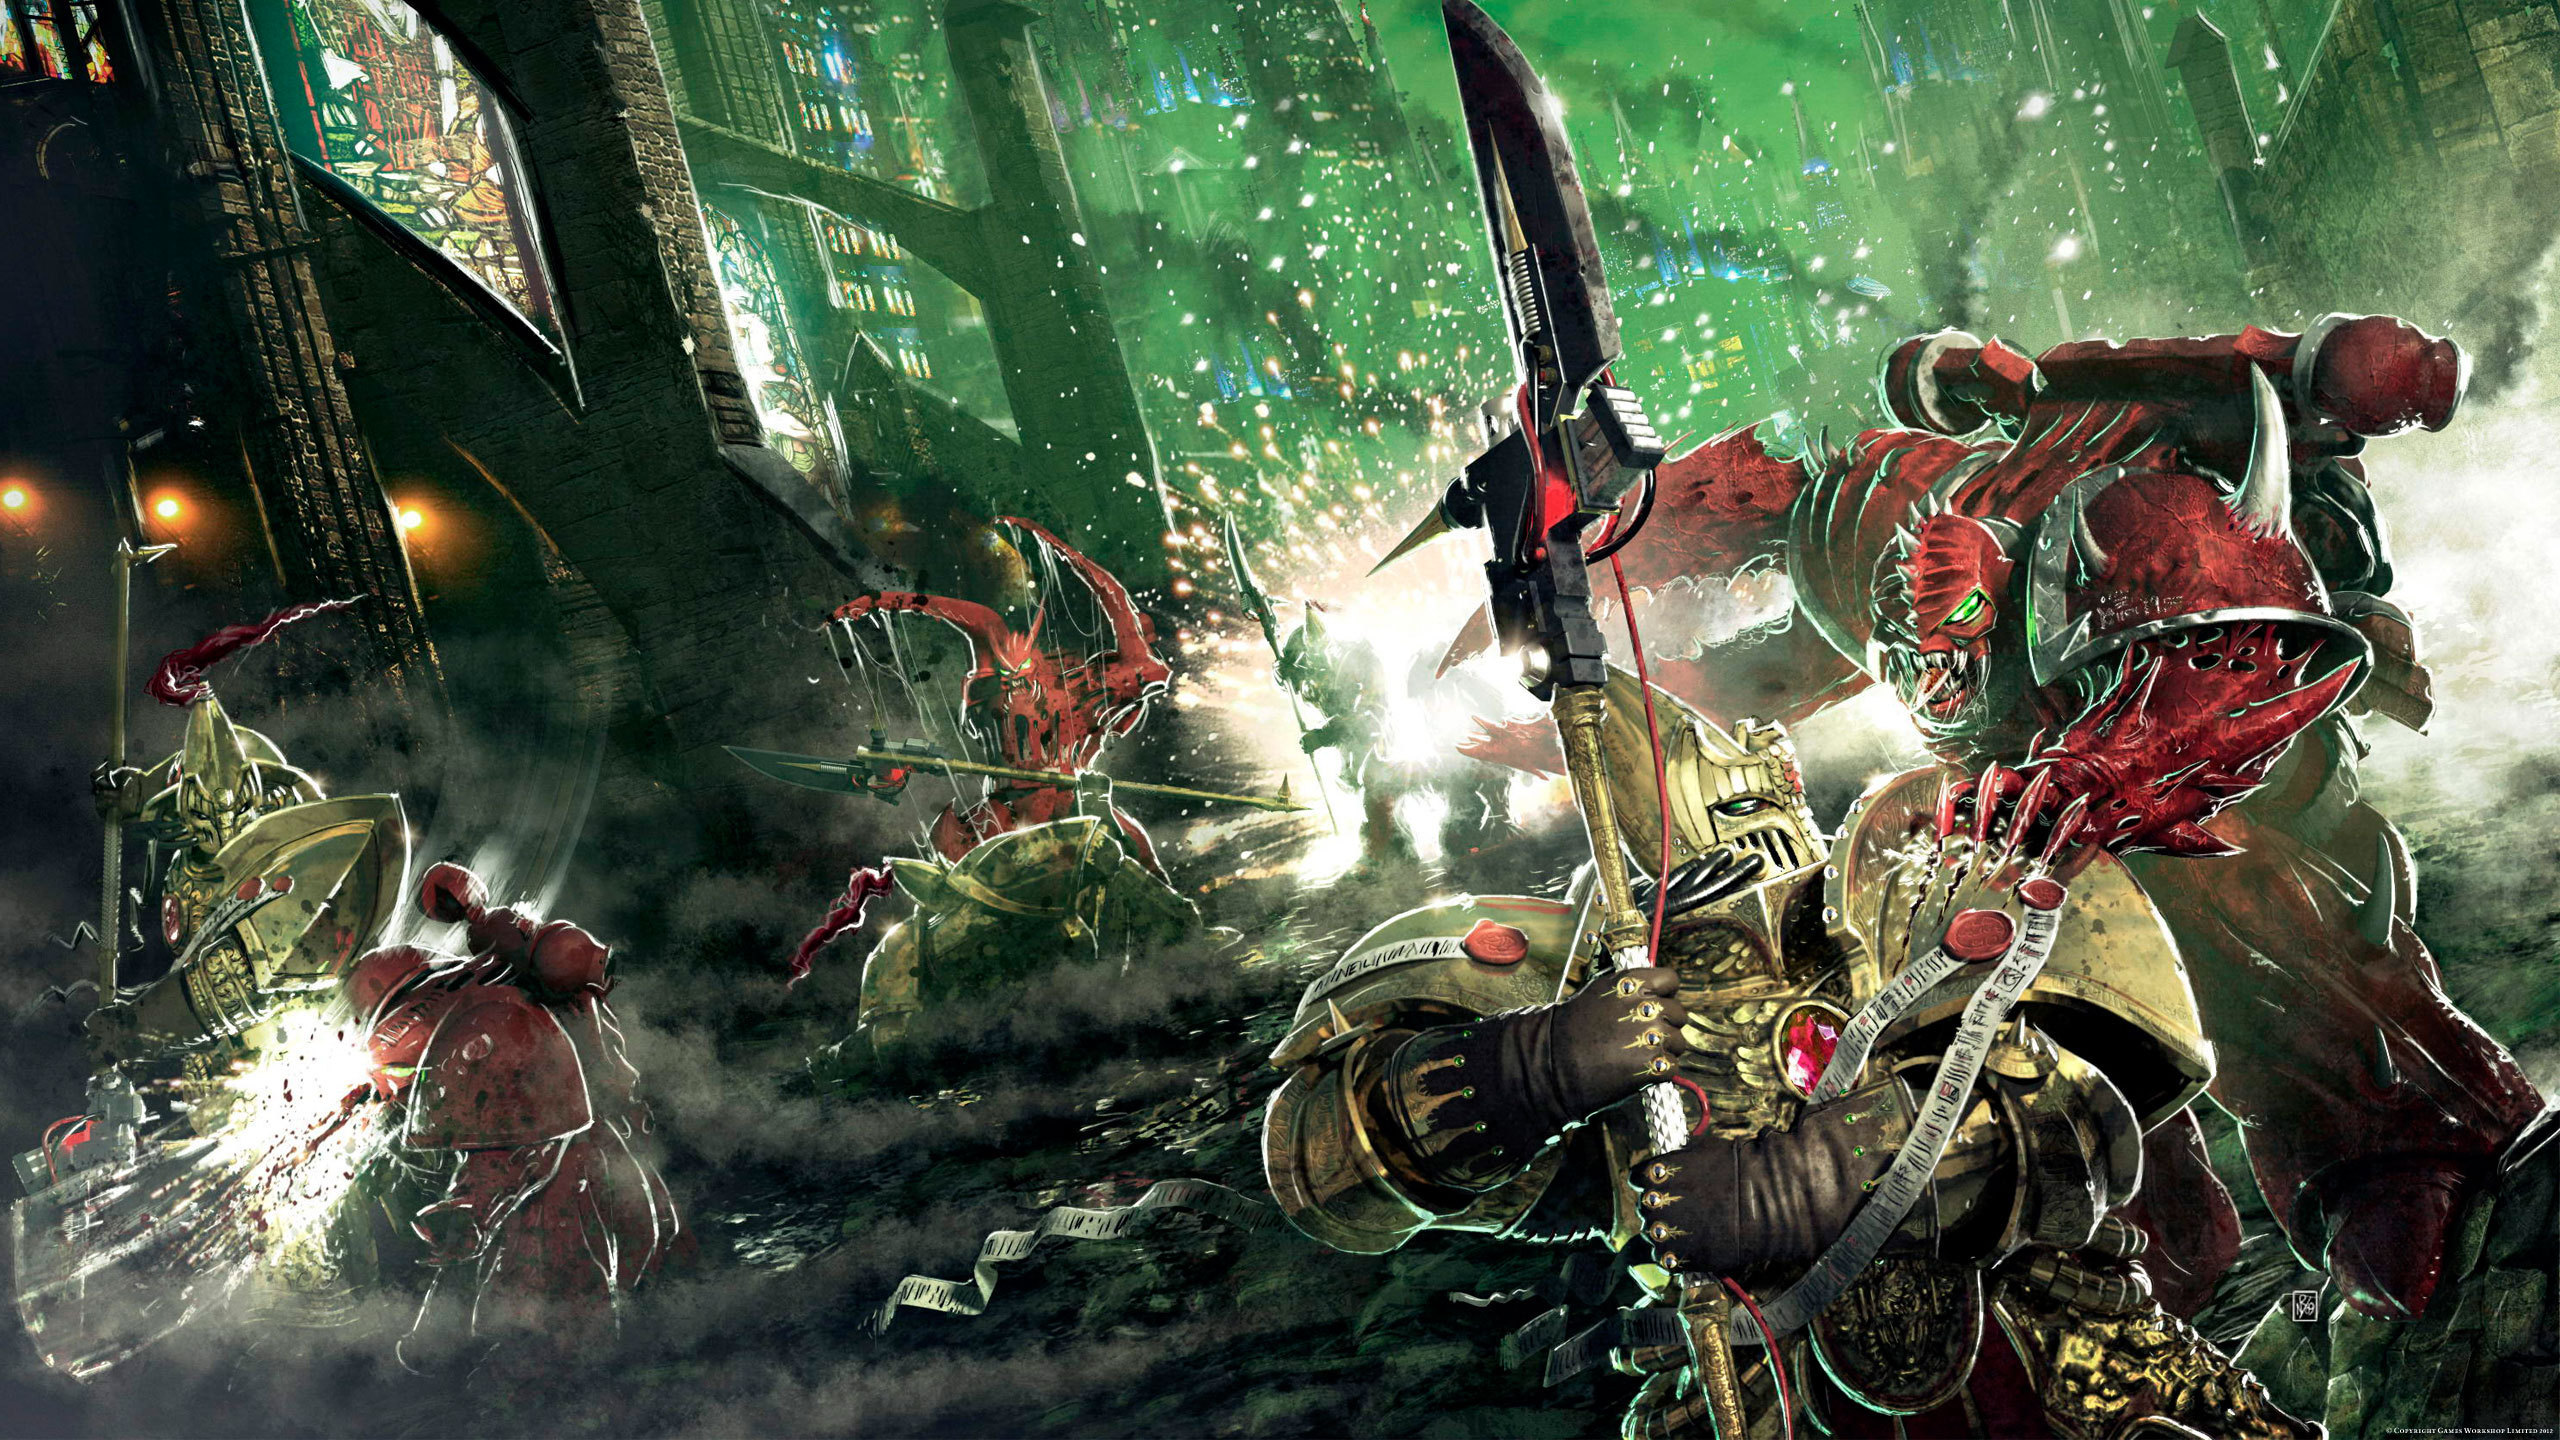 warhammer 40k wallpaper,action adventure game,pc game,strategy video game,shooter game,adventure game